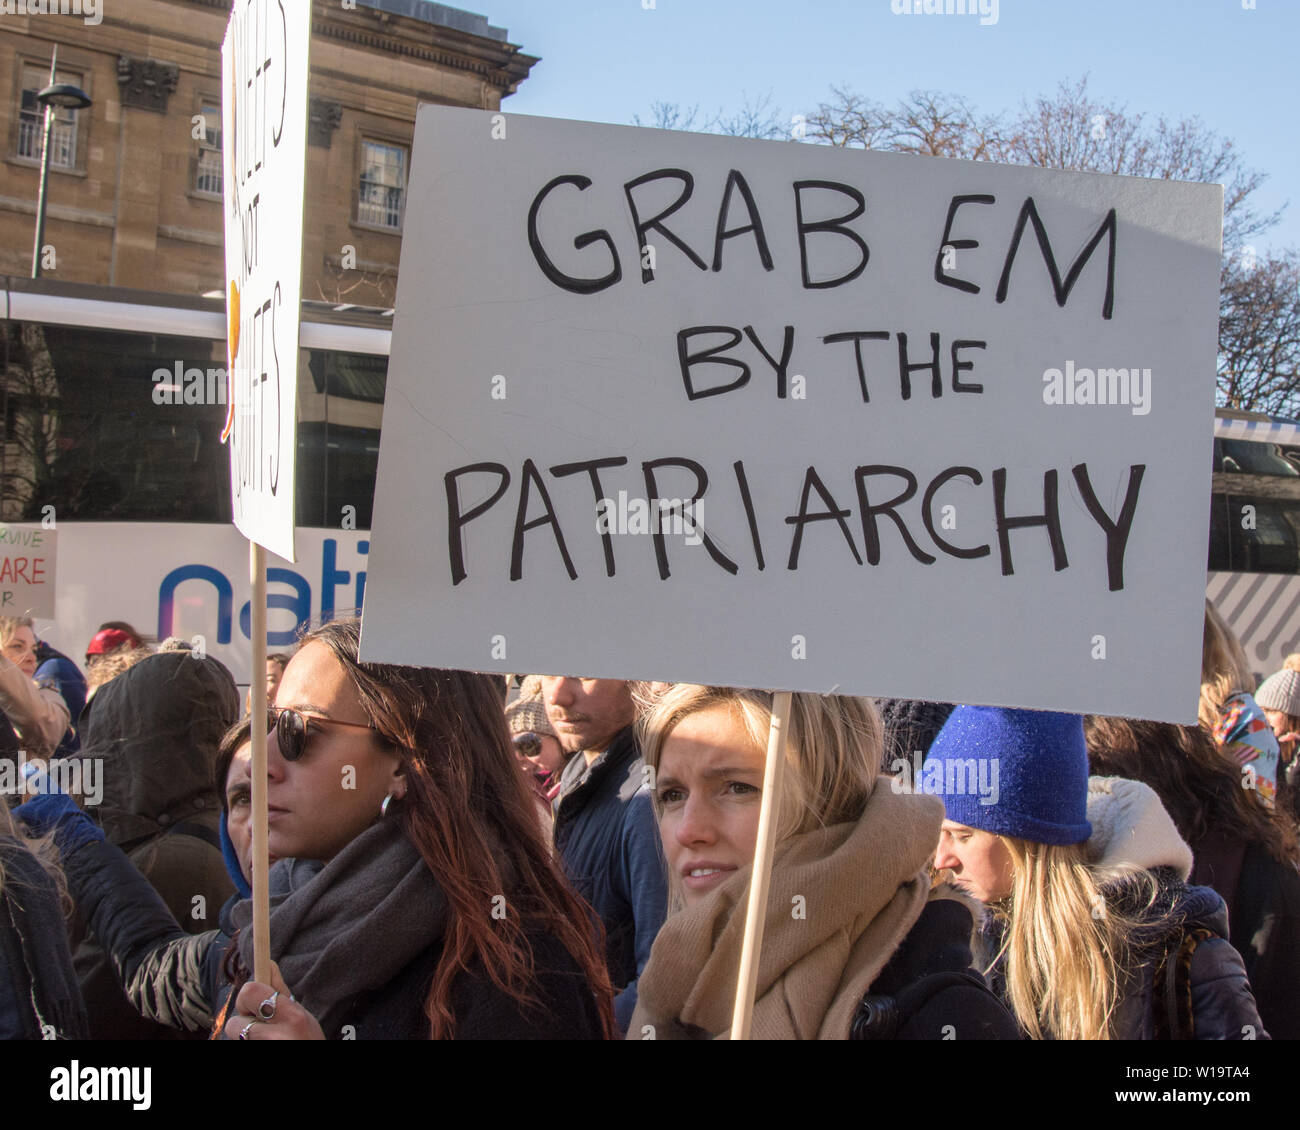 Women's March, London, UK, 21st January 2017. A woman carries a placard reading 'grab 'em by the patriarchy' during London's Women's march, the day after the inauguration of President Donald Trump. Up to 10,000 took part in London as women worldwide marked the day by marching in an act of international solidarity. Many carried placards referencing statements made by Donald Trump, considered by many as anti-women or otherwise offensive. Stock Photo